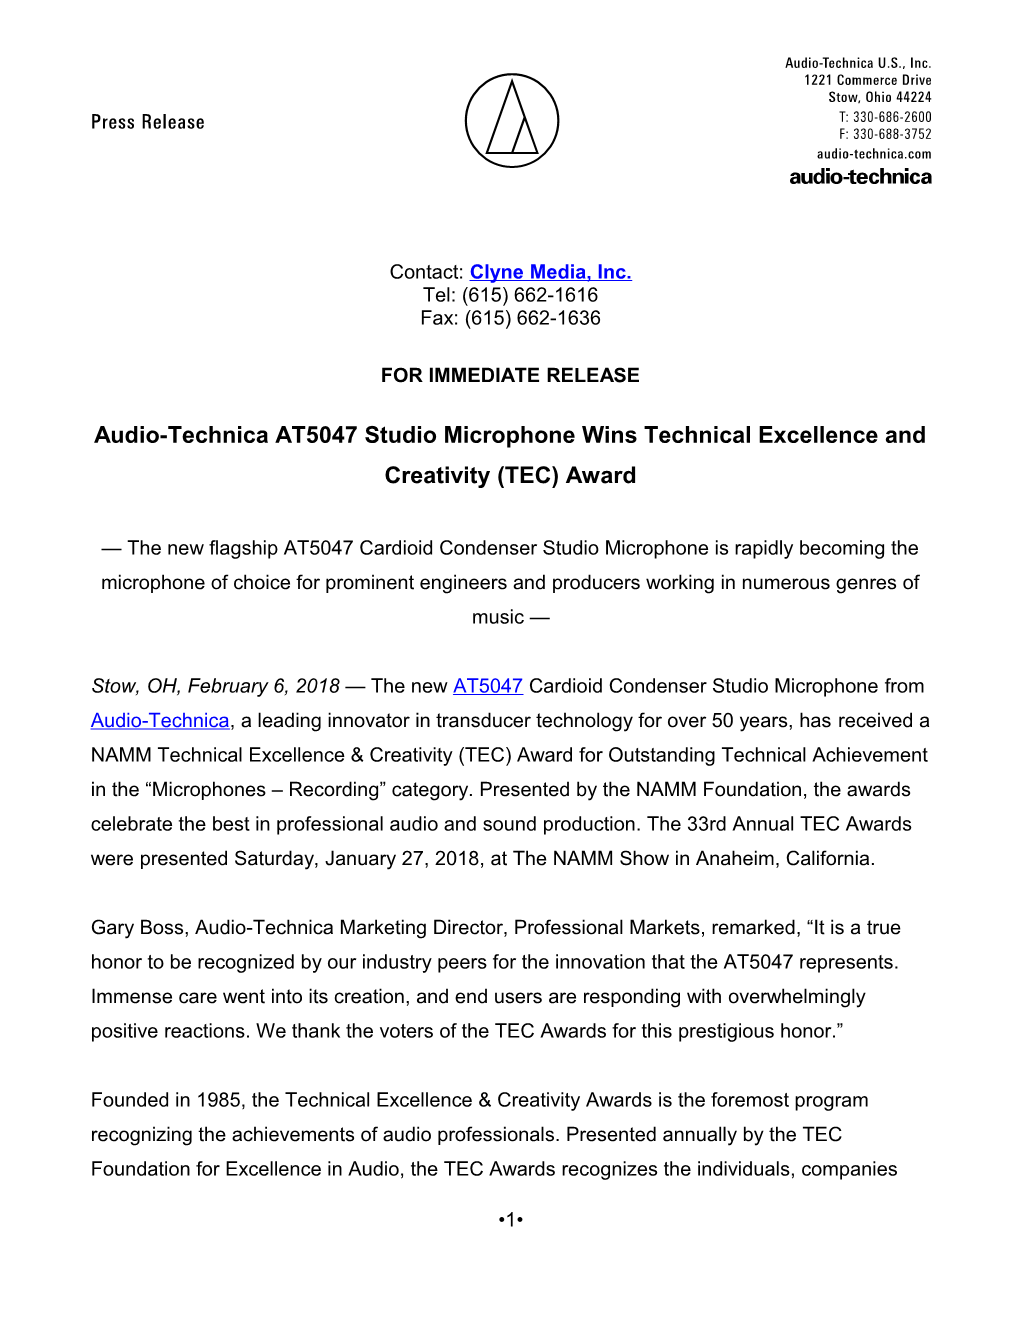 Audio-Technica At5047studio Microphone Wins Technical Excellence and Creativity (TEC) Award